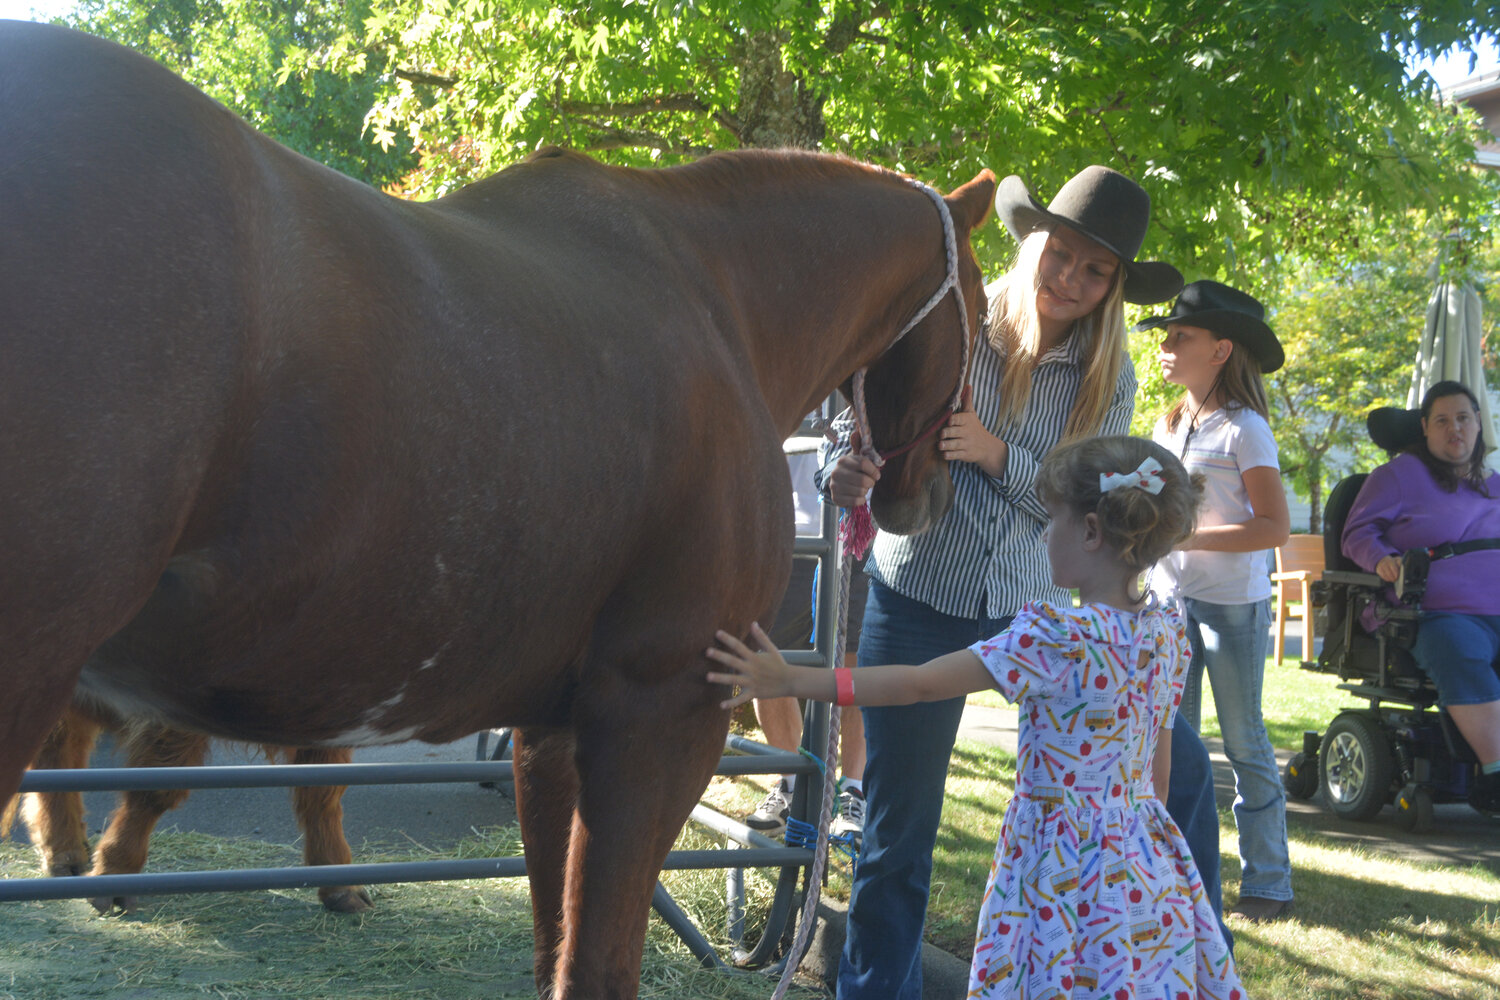 A little girl pets a horse at the Rosemont Round-Up at Prestige Senior Living Rosemont on Sept. 8.